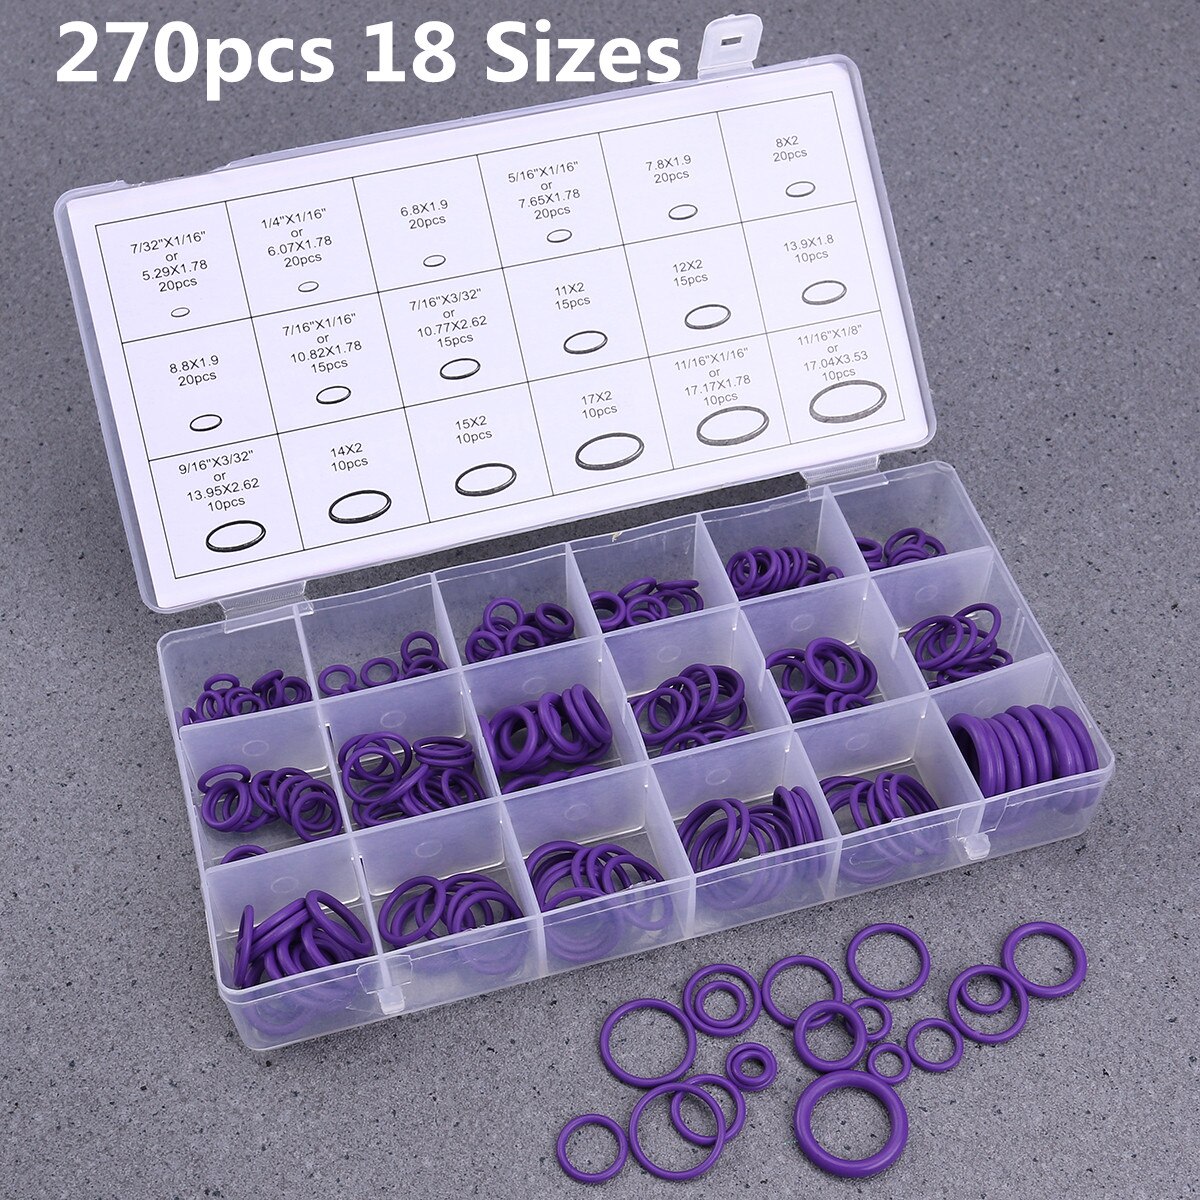 270pcs 18 Sizes O Ring Rubber Insulation Gasket Washer Seals Tool Car Air Conditioning Compressor Seals Car Repair tools A20: Purple